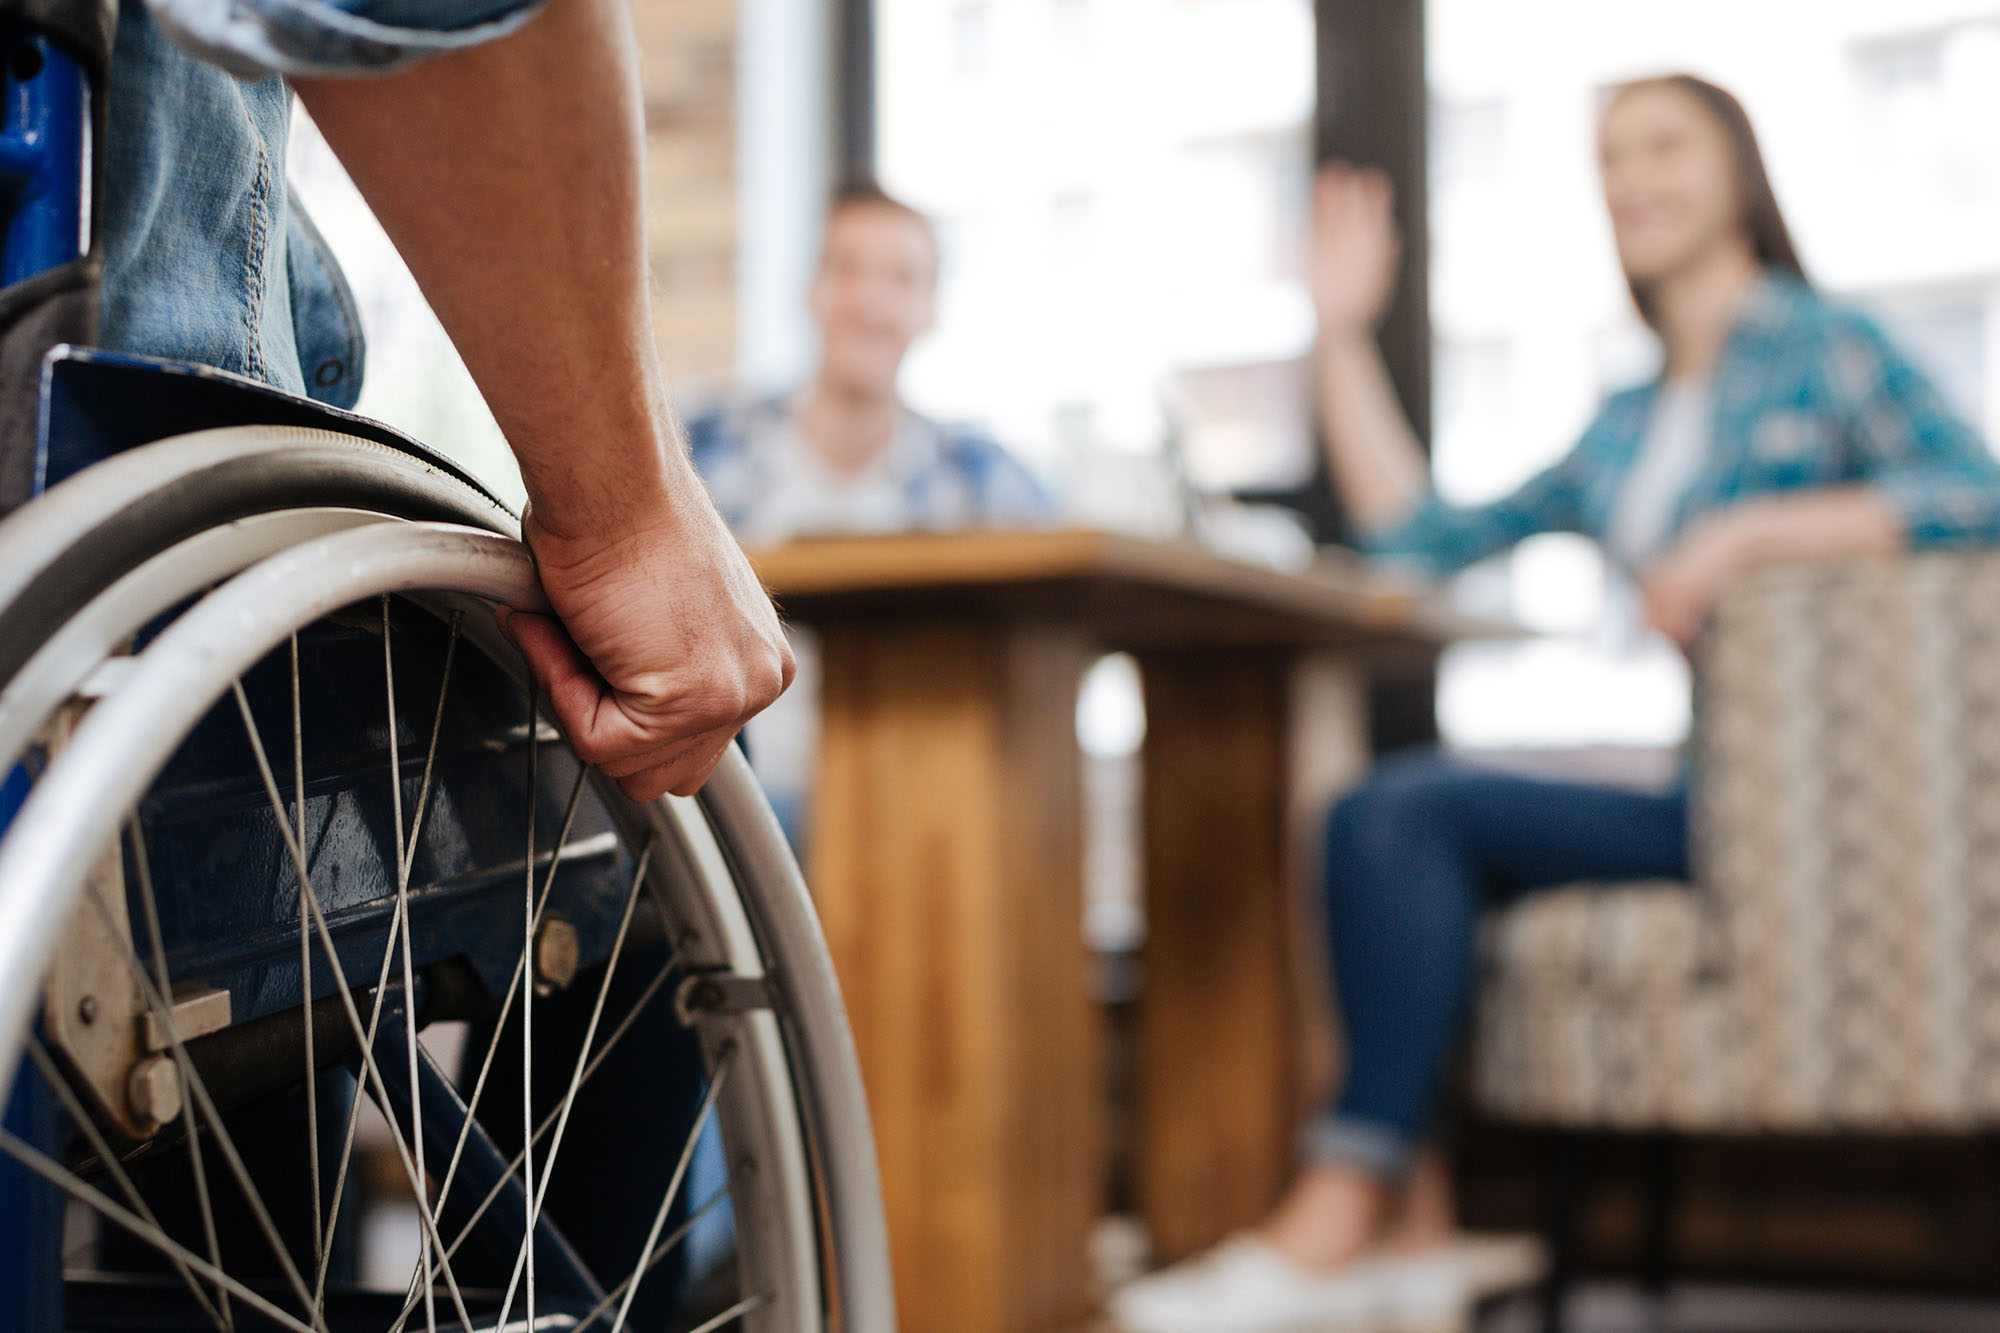 Attract the accessible and inclusive tourism market to your place